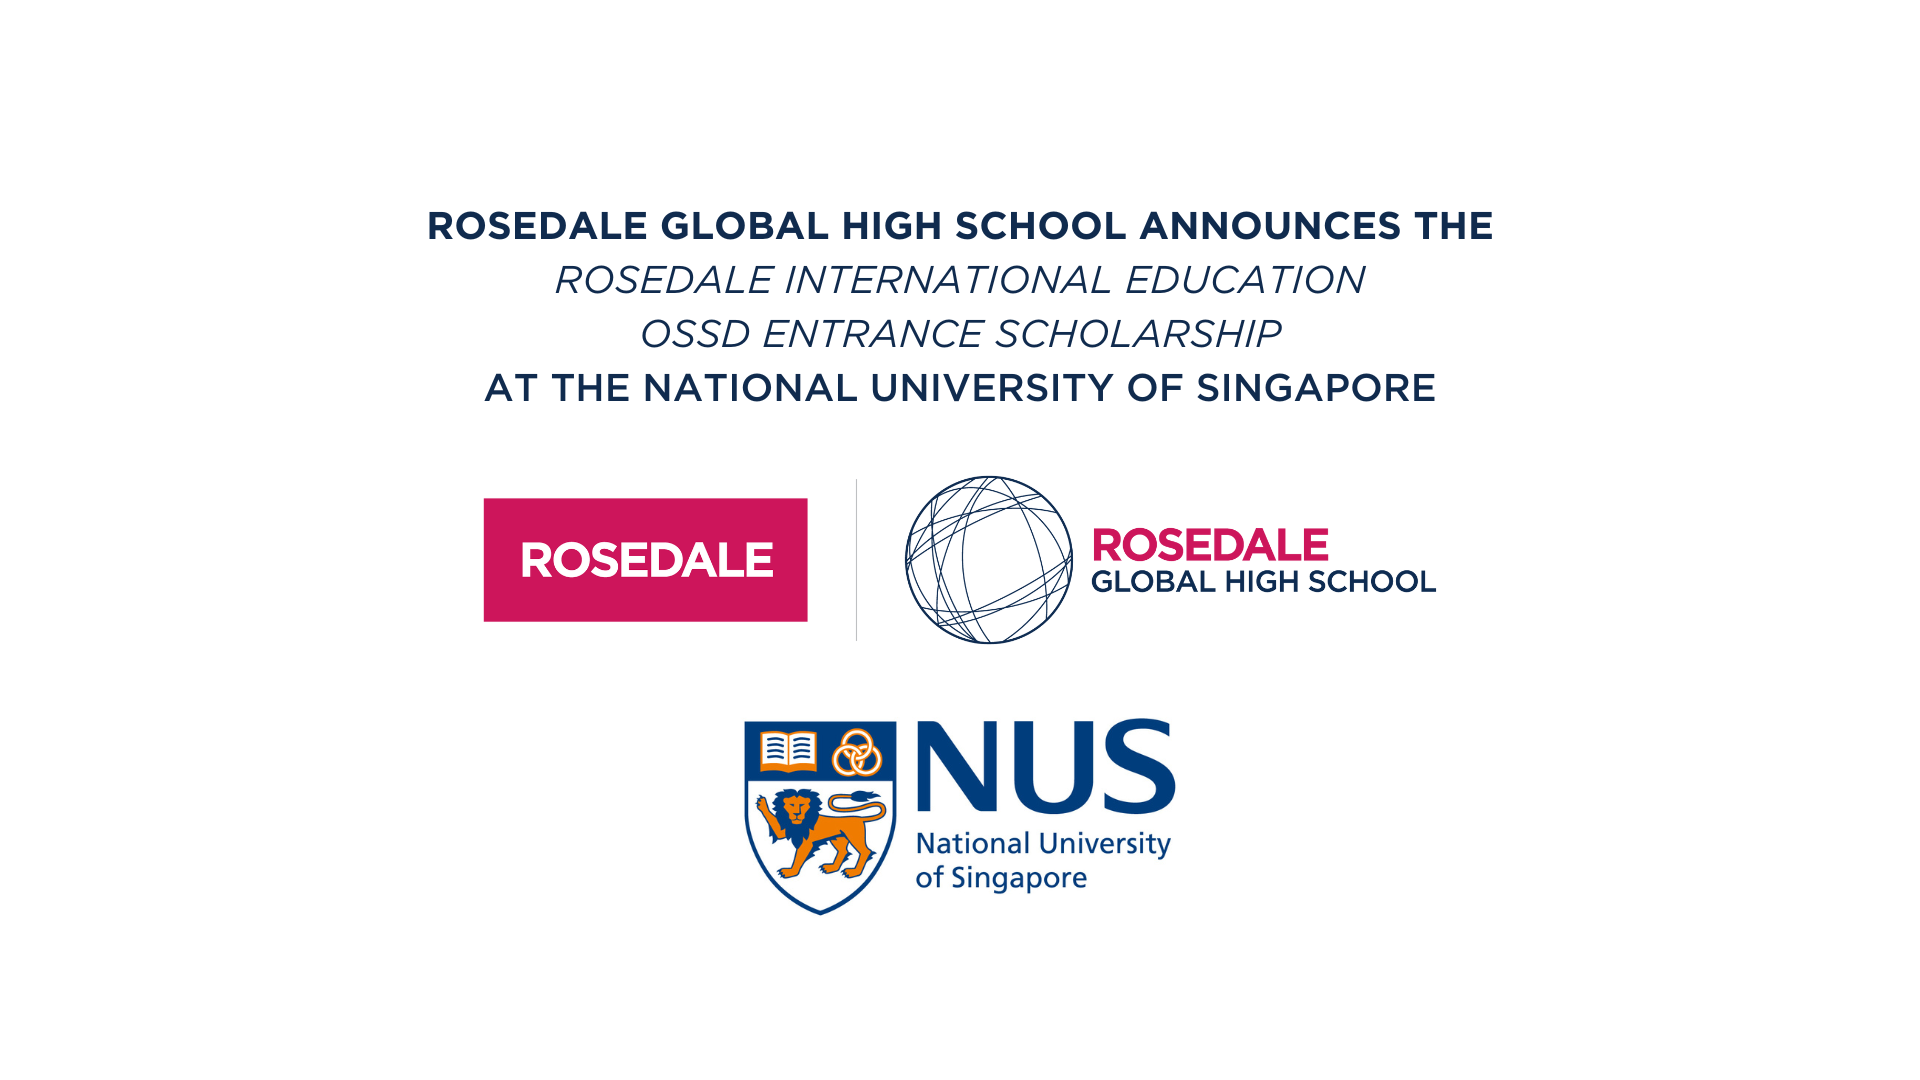 Rosedale Global High School announces the Rosedale International Education OSSD Entrance Scholarship at the National University of Singapore